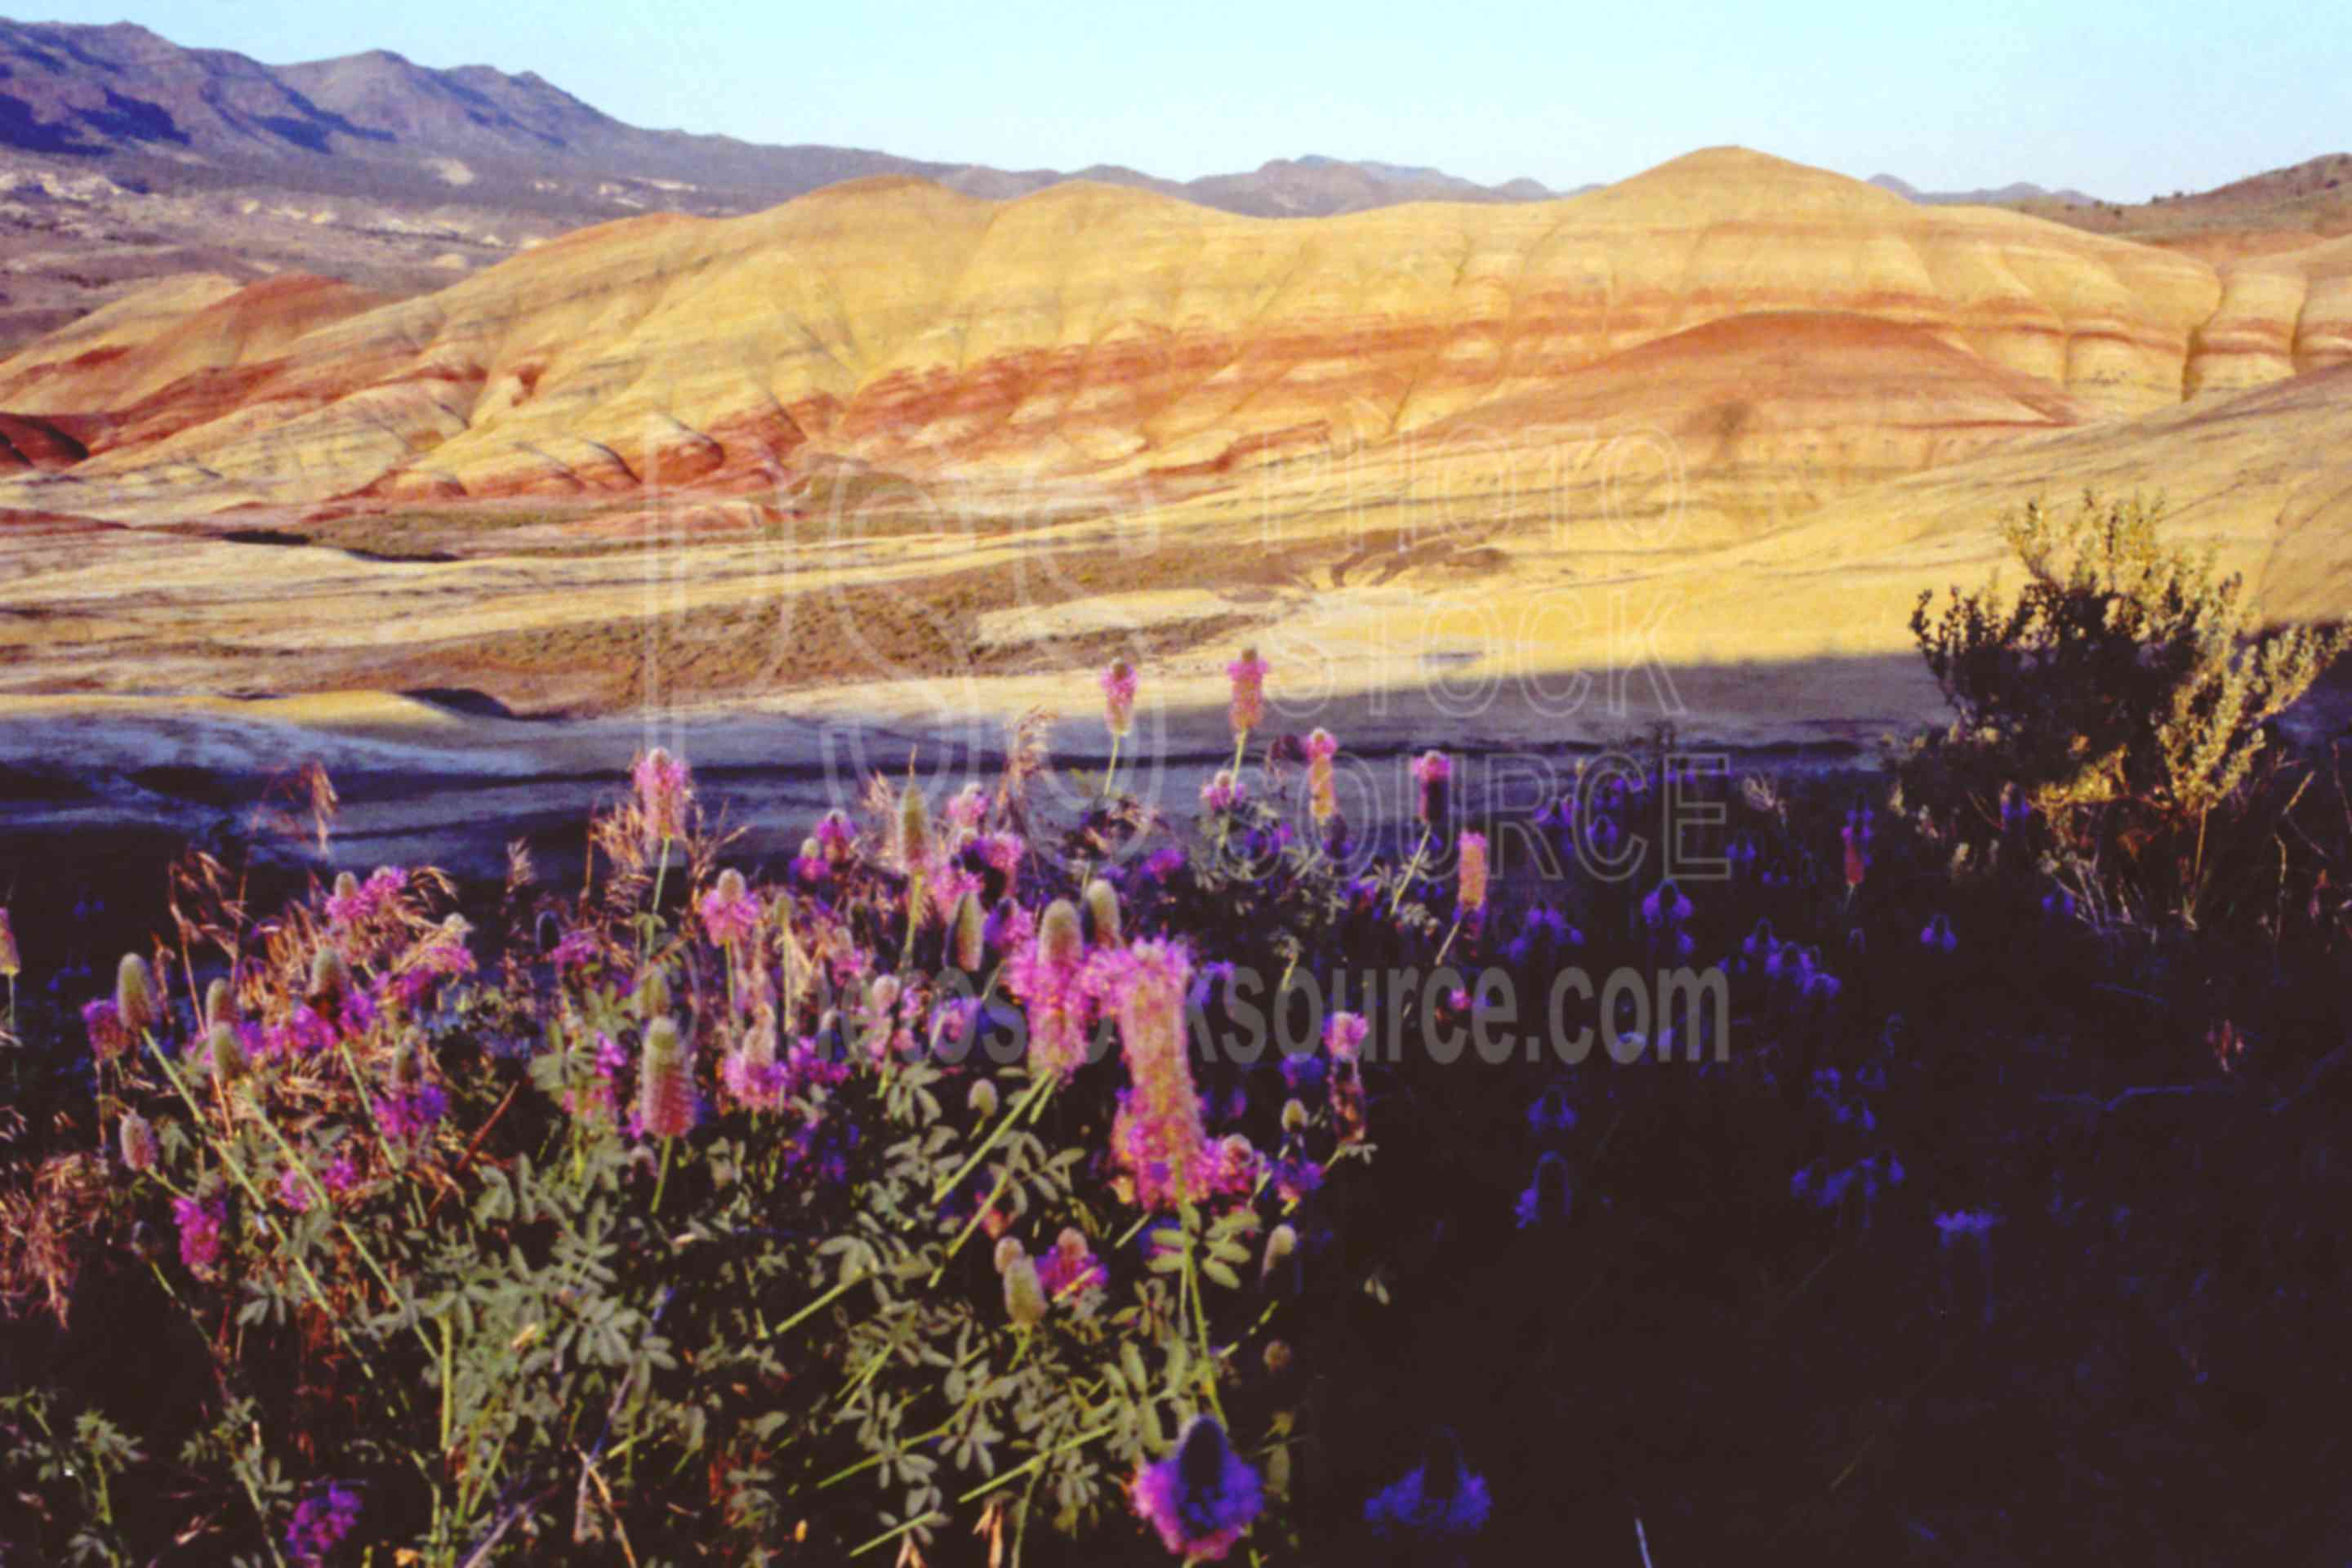 Painted Hills,clover,flower,john day formation,thomas condon fossil bed,plant,usas,plants